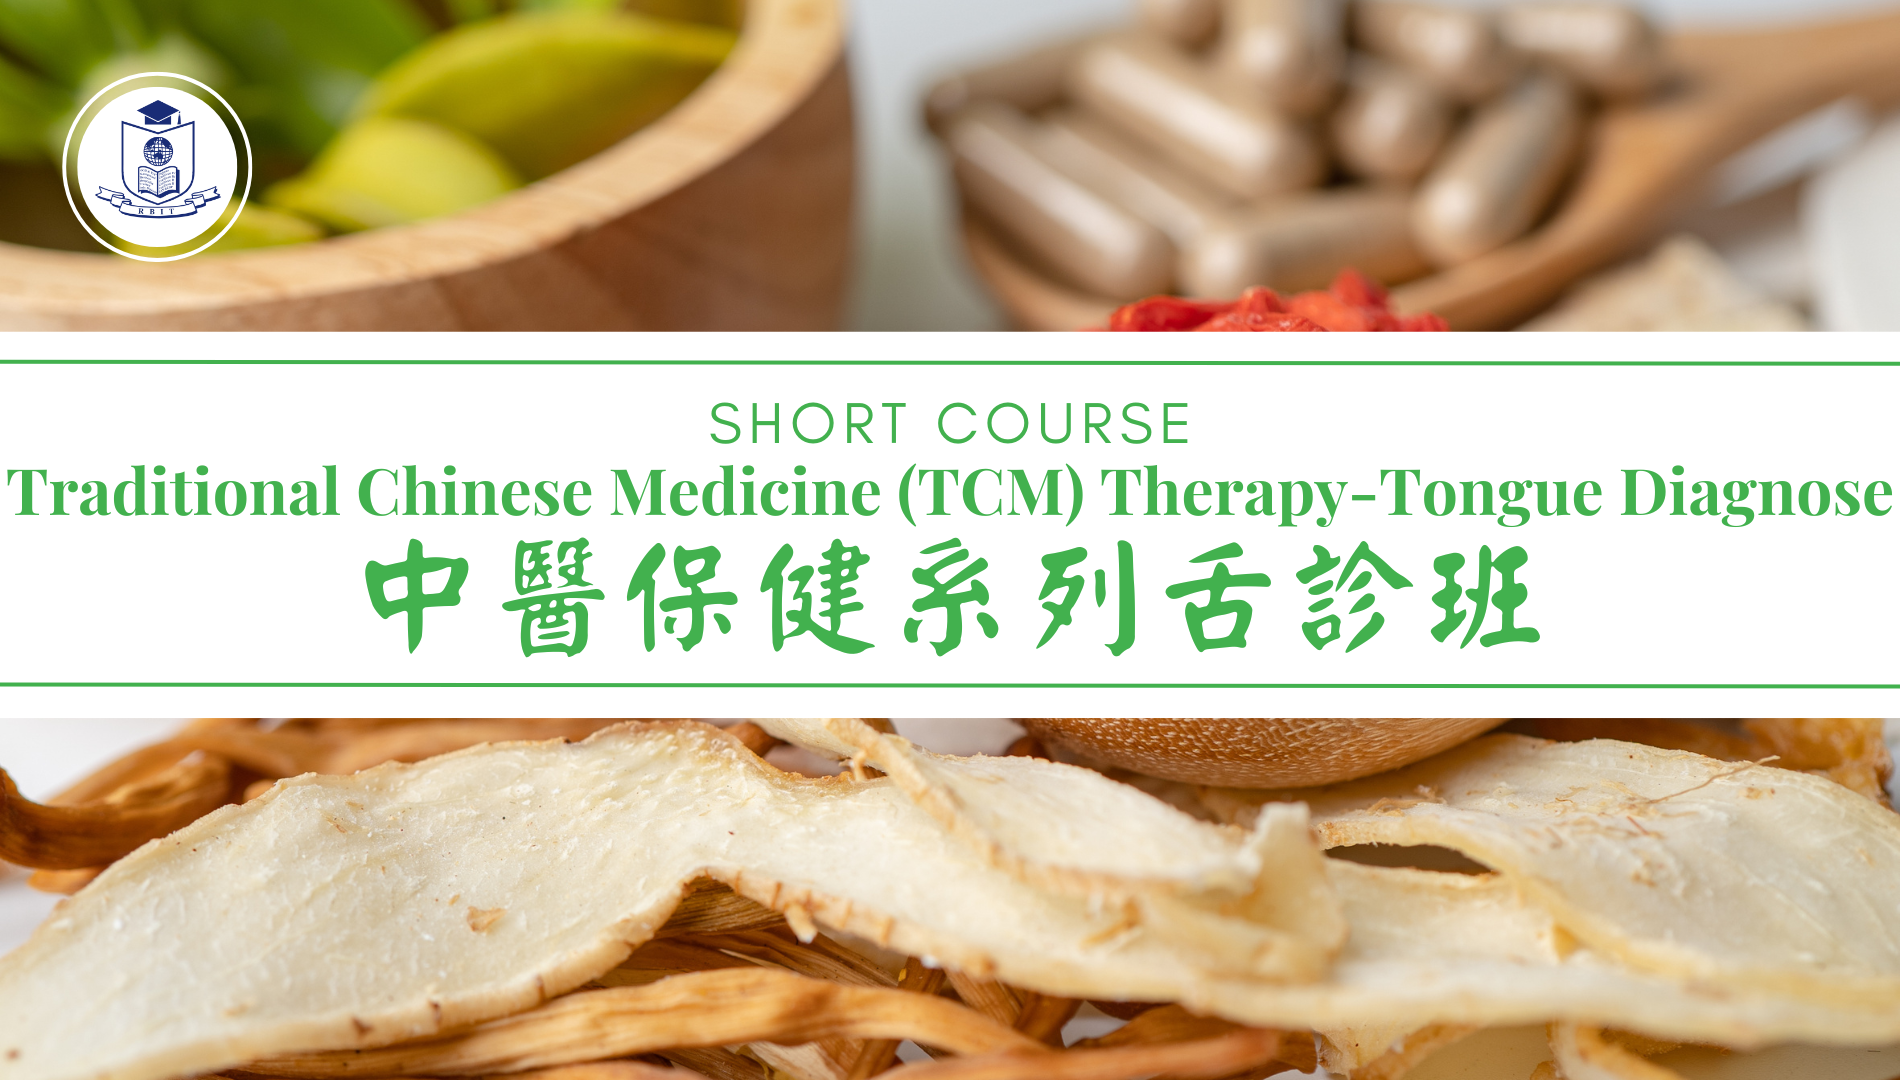 Short Course: TCM Therapy-Tongue Diagnosis (Delivered in Mandarin)